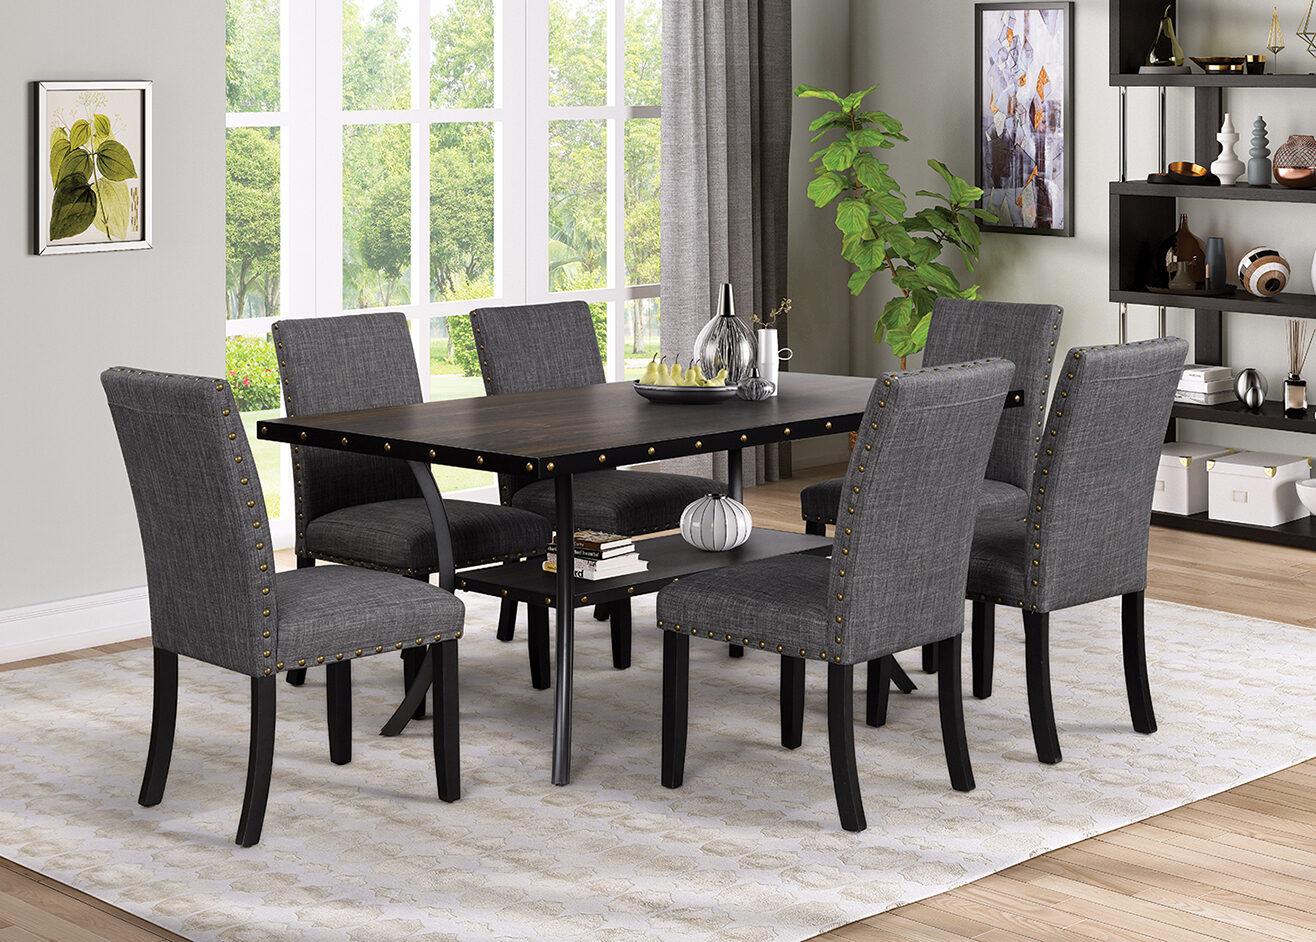 Gaucho, 7 Piece Dining Set, With Gray Chairs,Mainline